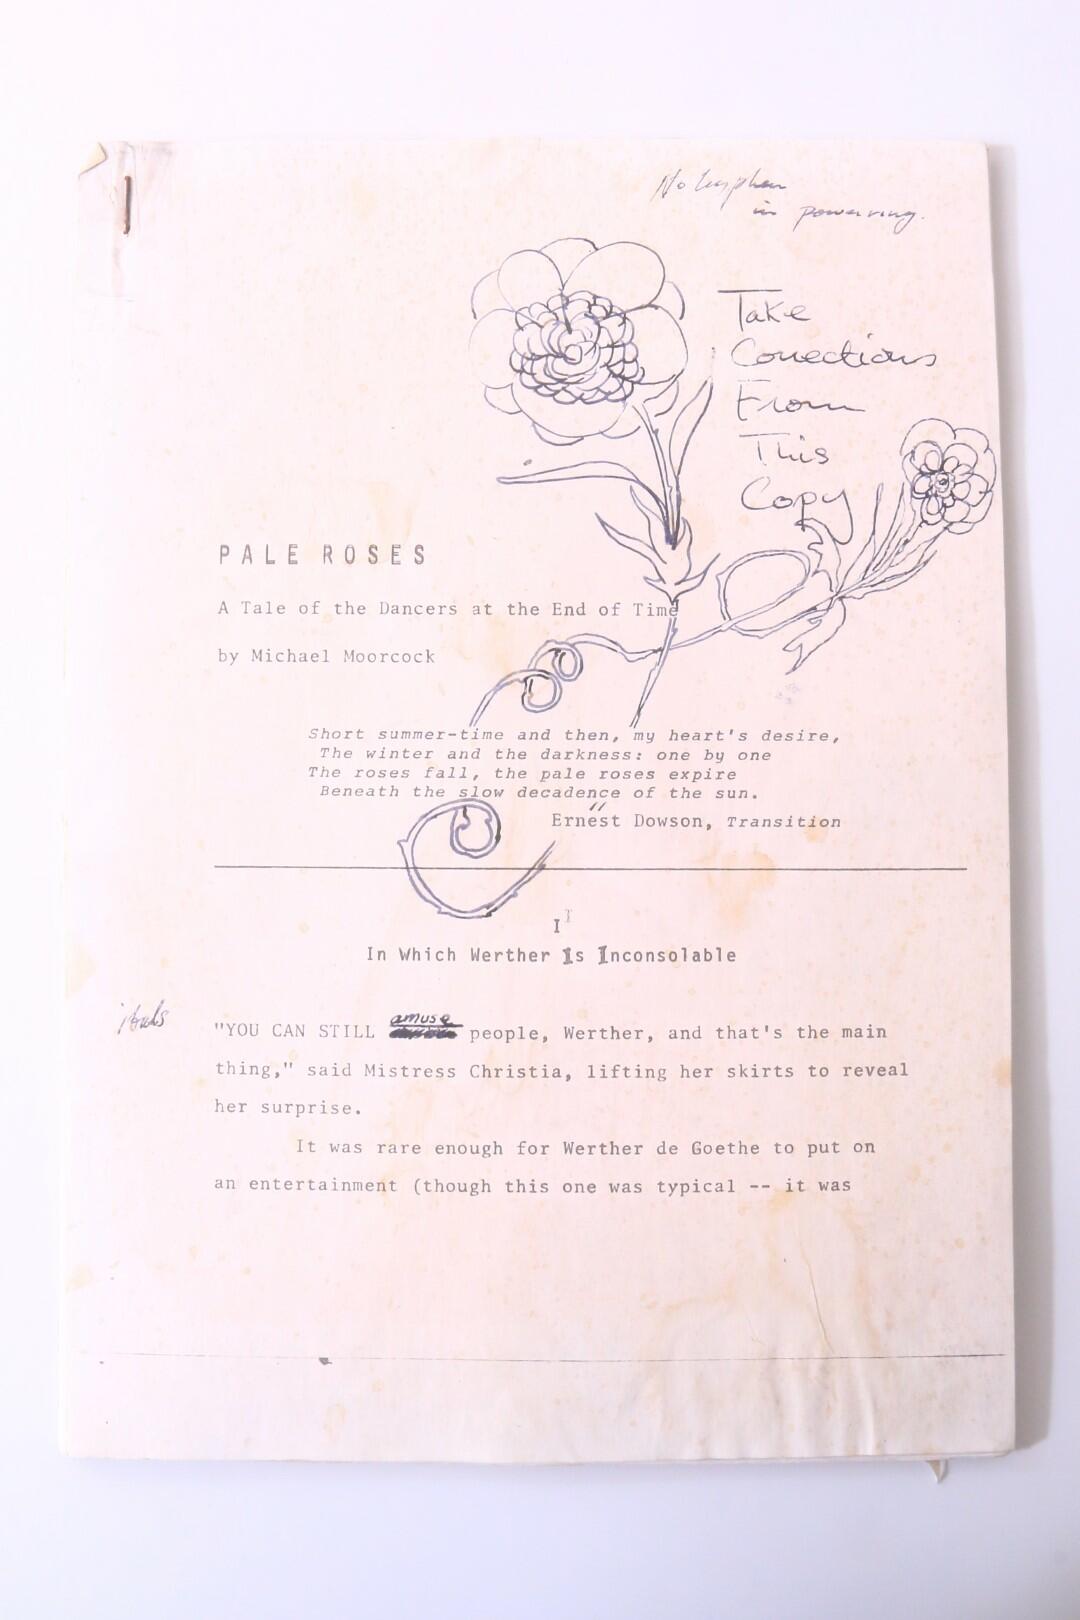 Michael Moorcock - Pale Roses: A Tale of the Dancers at the End of Time - No Publisher, 1974, Manuscript.